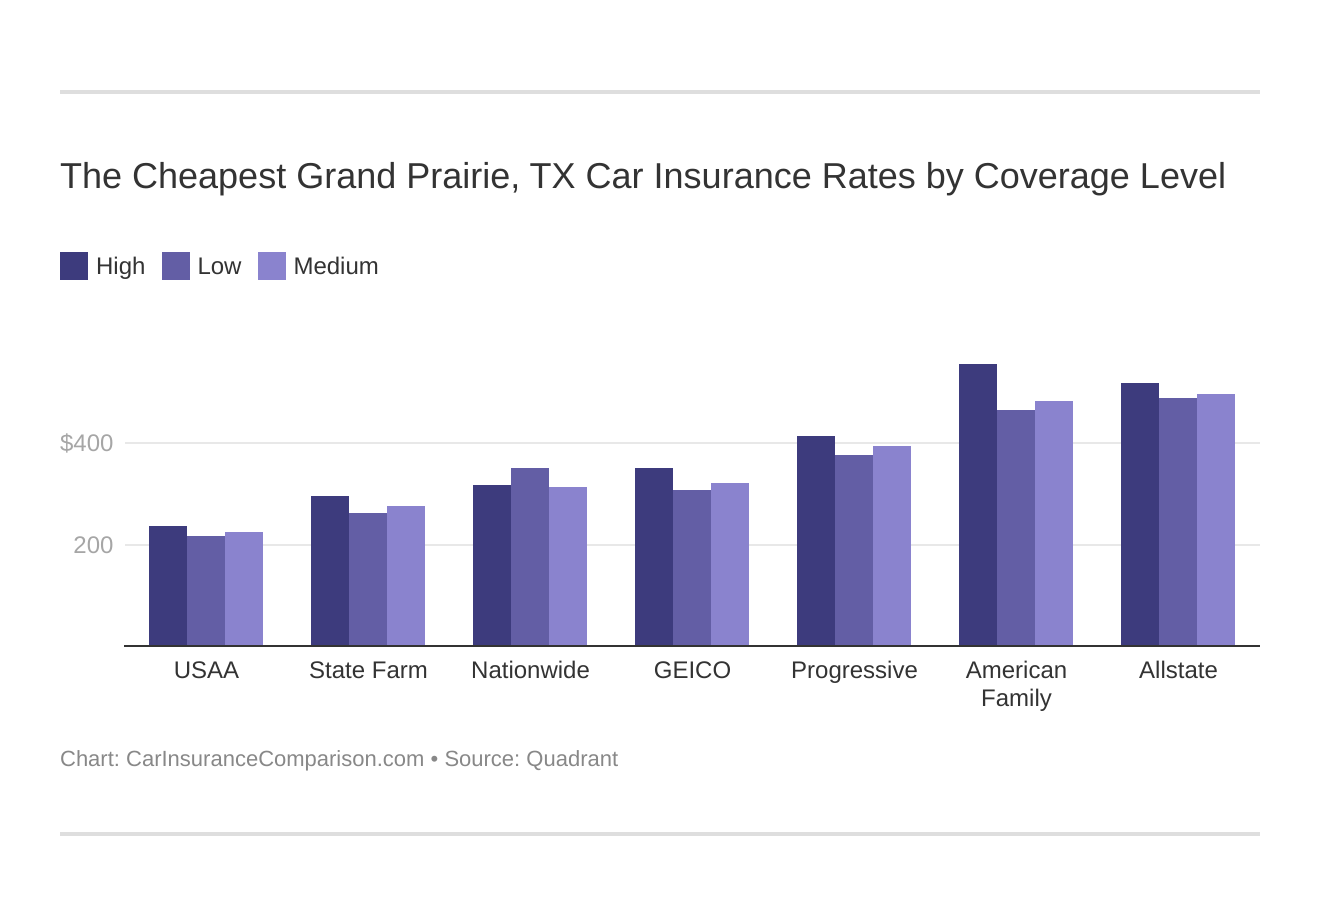 The Cheapest Grand Prairie, TX Car Insurance Rates by Coverage Level